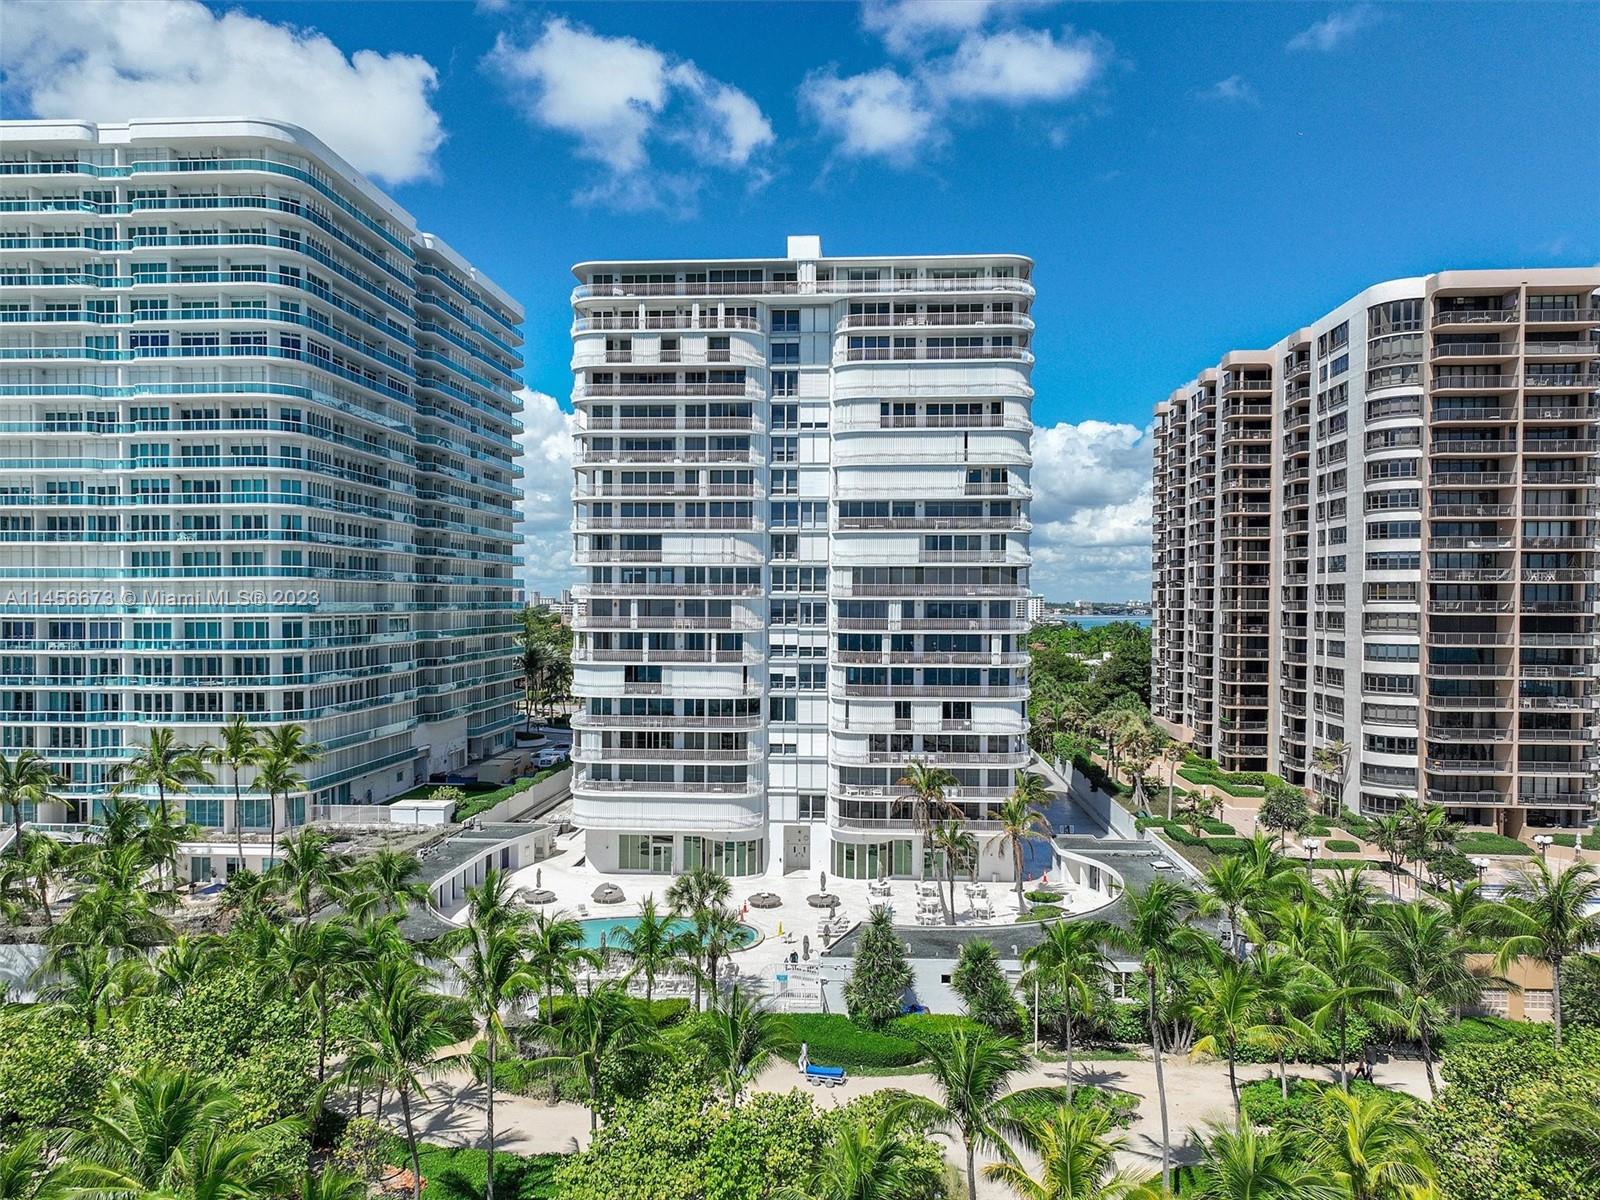 Exclusive Bal Harbour Direct Oceanfront Condo. Spacious 3300 SF N.E. Corner with breathtaking ocean views. The unit is being sold together with Cabana #26!! 3 bedrooms plus a bonus office/breakfast room. Marble floors throughout, updated kitchen with stainless steel appliances and granite tops. Residence offers large Master Suite with sitting area, his and hers baths and oversized walk in closets, great wrap around terrace for entertaining. Bal harbour 101 is a prestigious full service building which offers restaurant, tennis, fitness club, pool, hotel rooms only available for owners guests, and a recently undone complete renovation. Can be configured to a 5-6 bedroom. See photos for proposed plan.